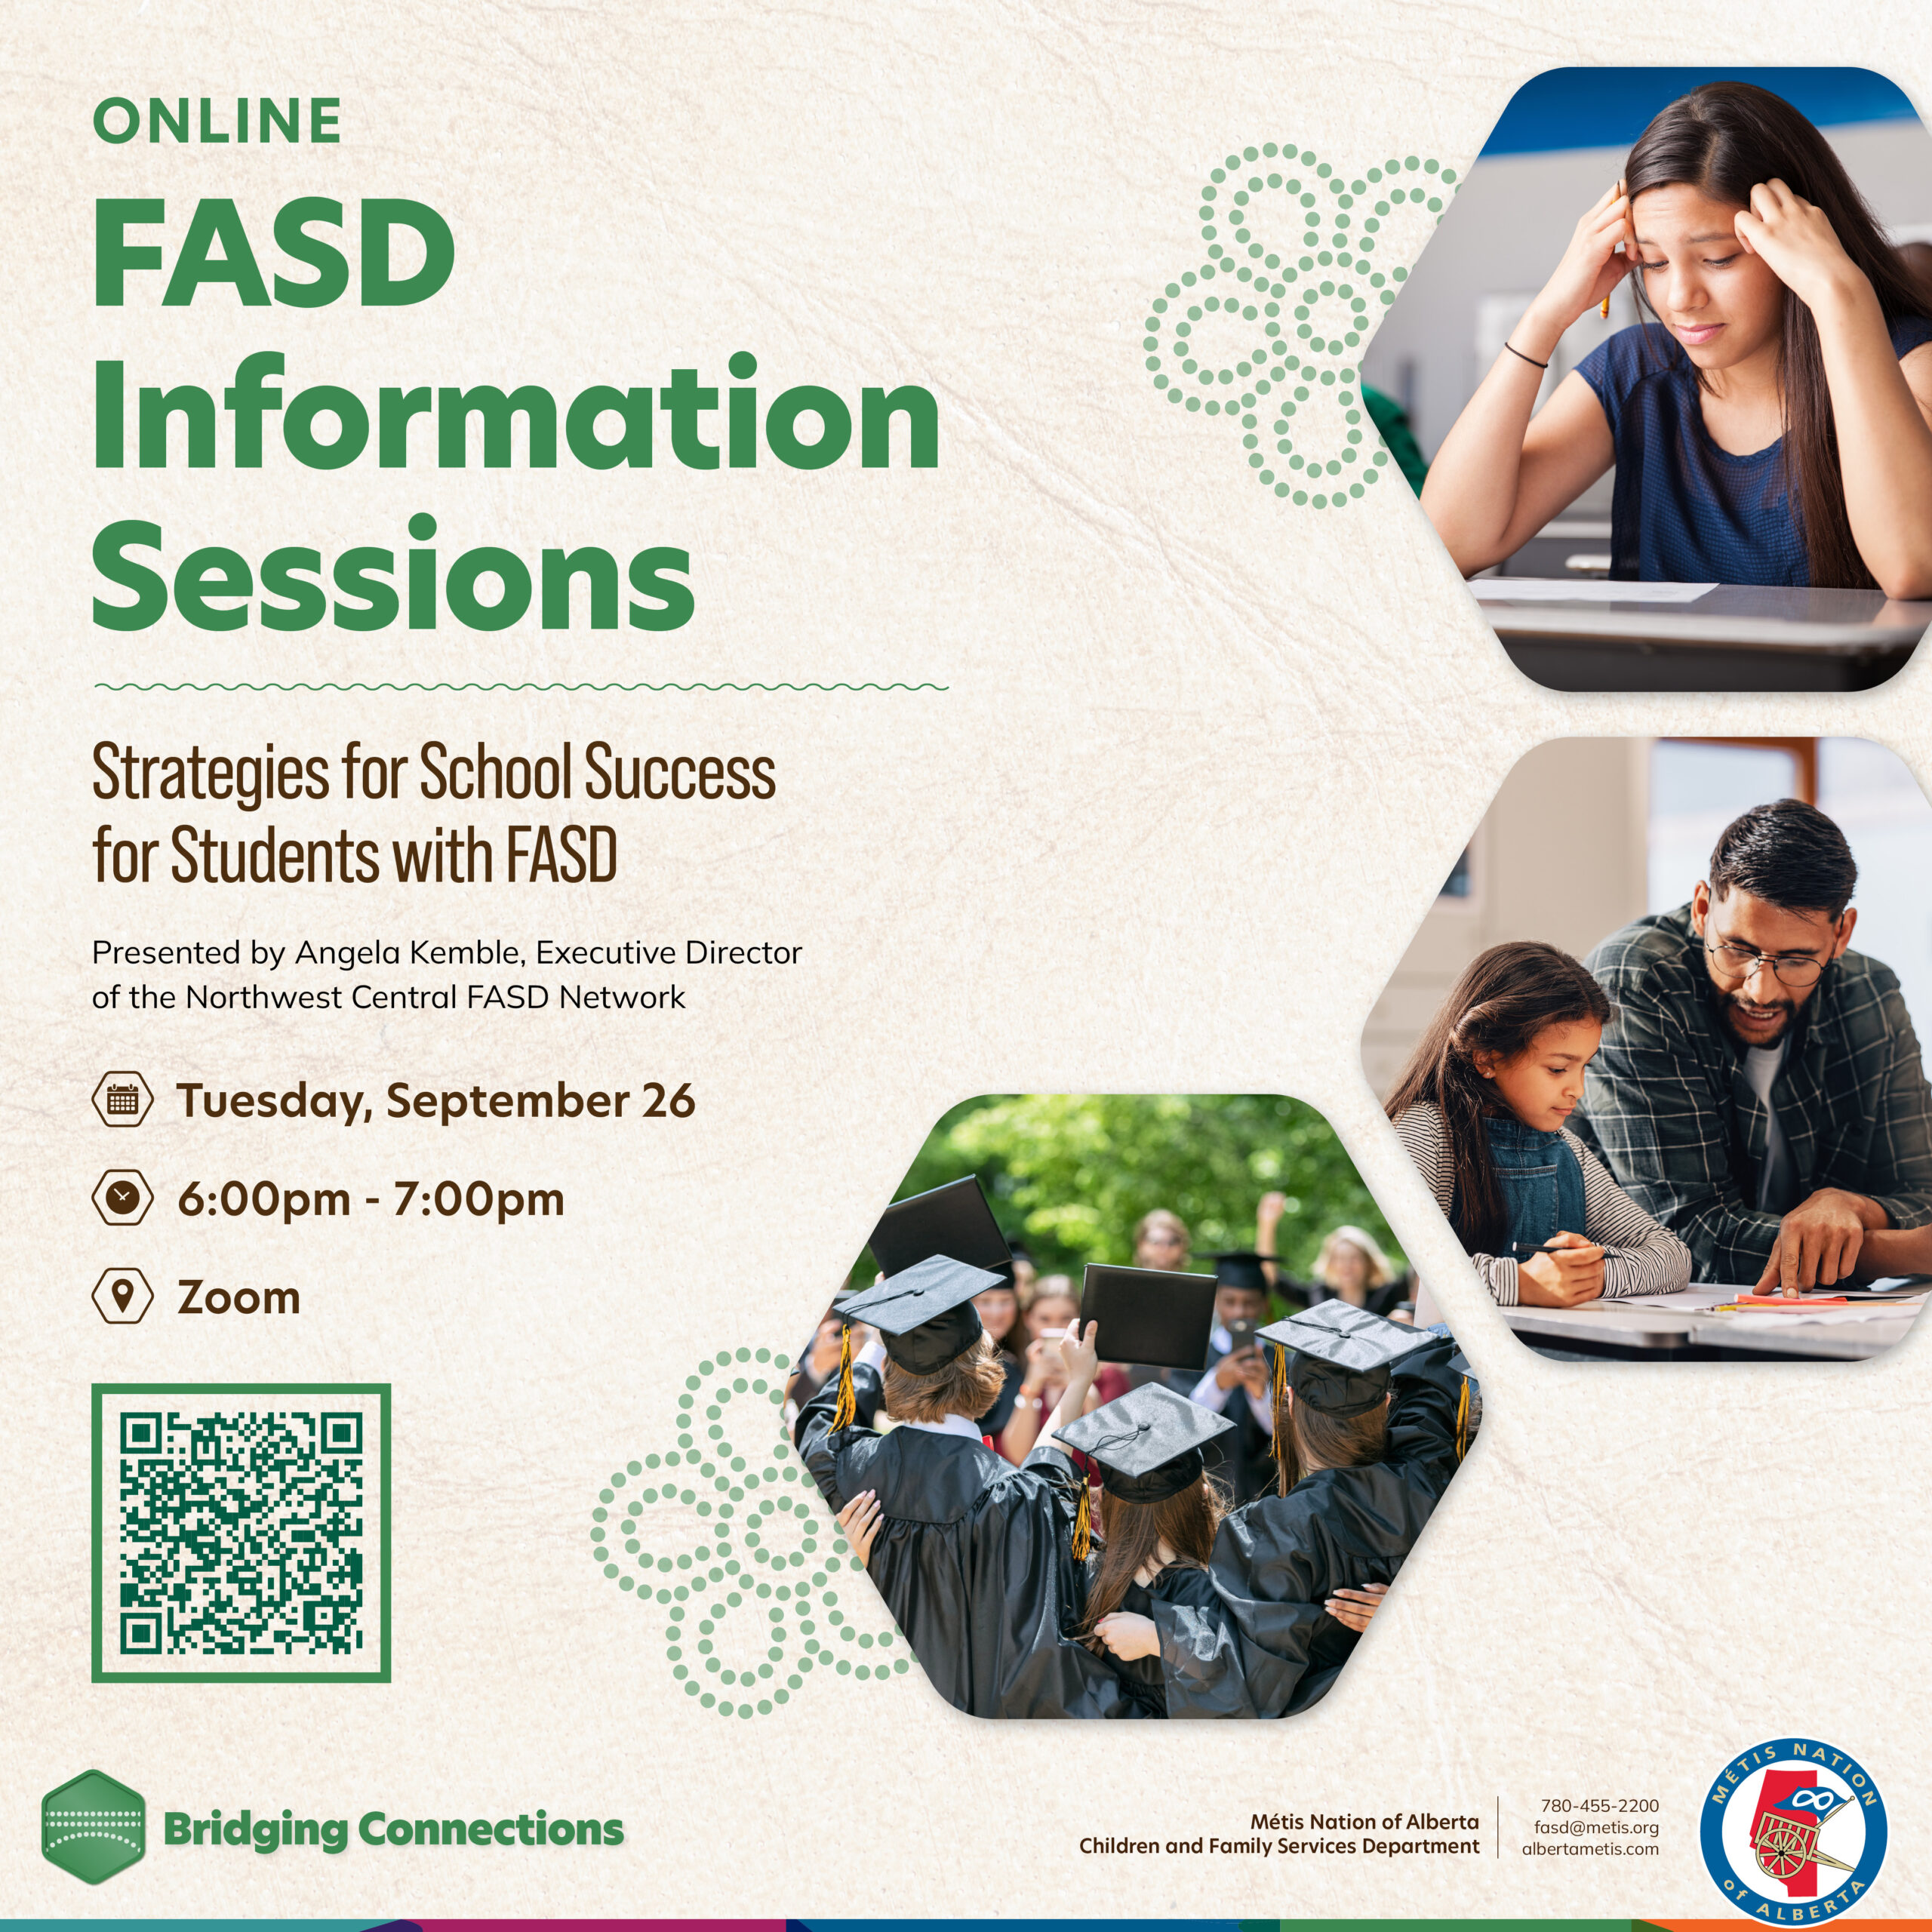 Online FASD Information Sessions. Strategies for School Success for Student with FASD. Presended by Angela Kemble, Executive Director of the Northwest Central FASD Network. Tuesday, September 26, 6 p.,.- 7 p.m. on Zoom.